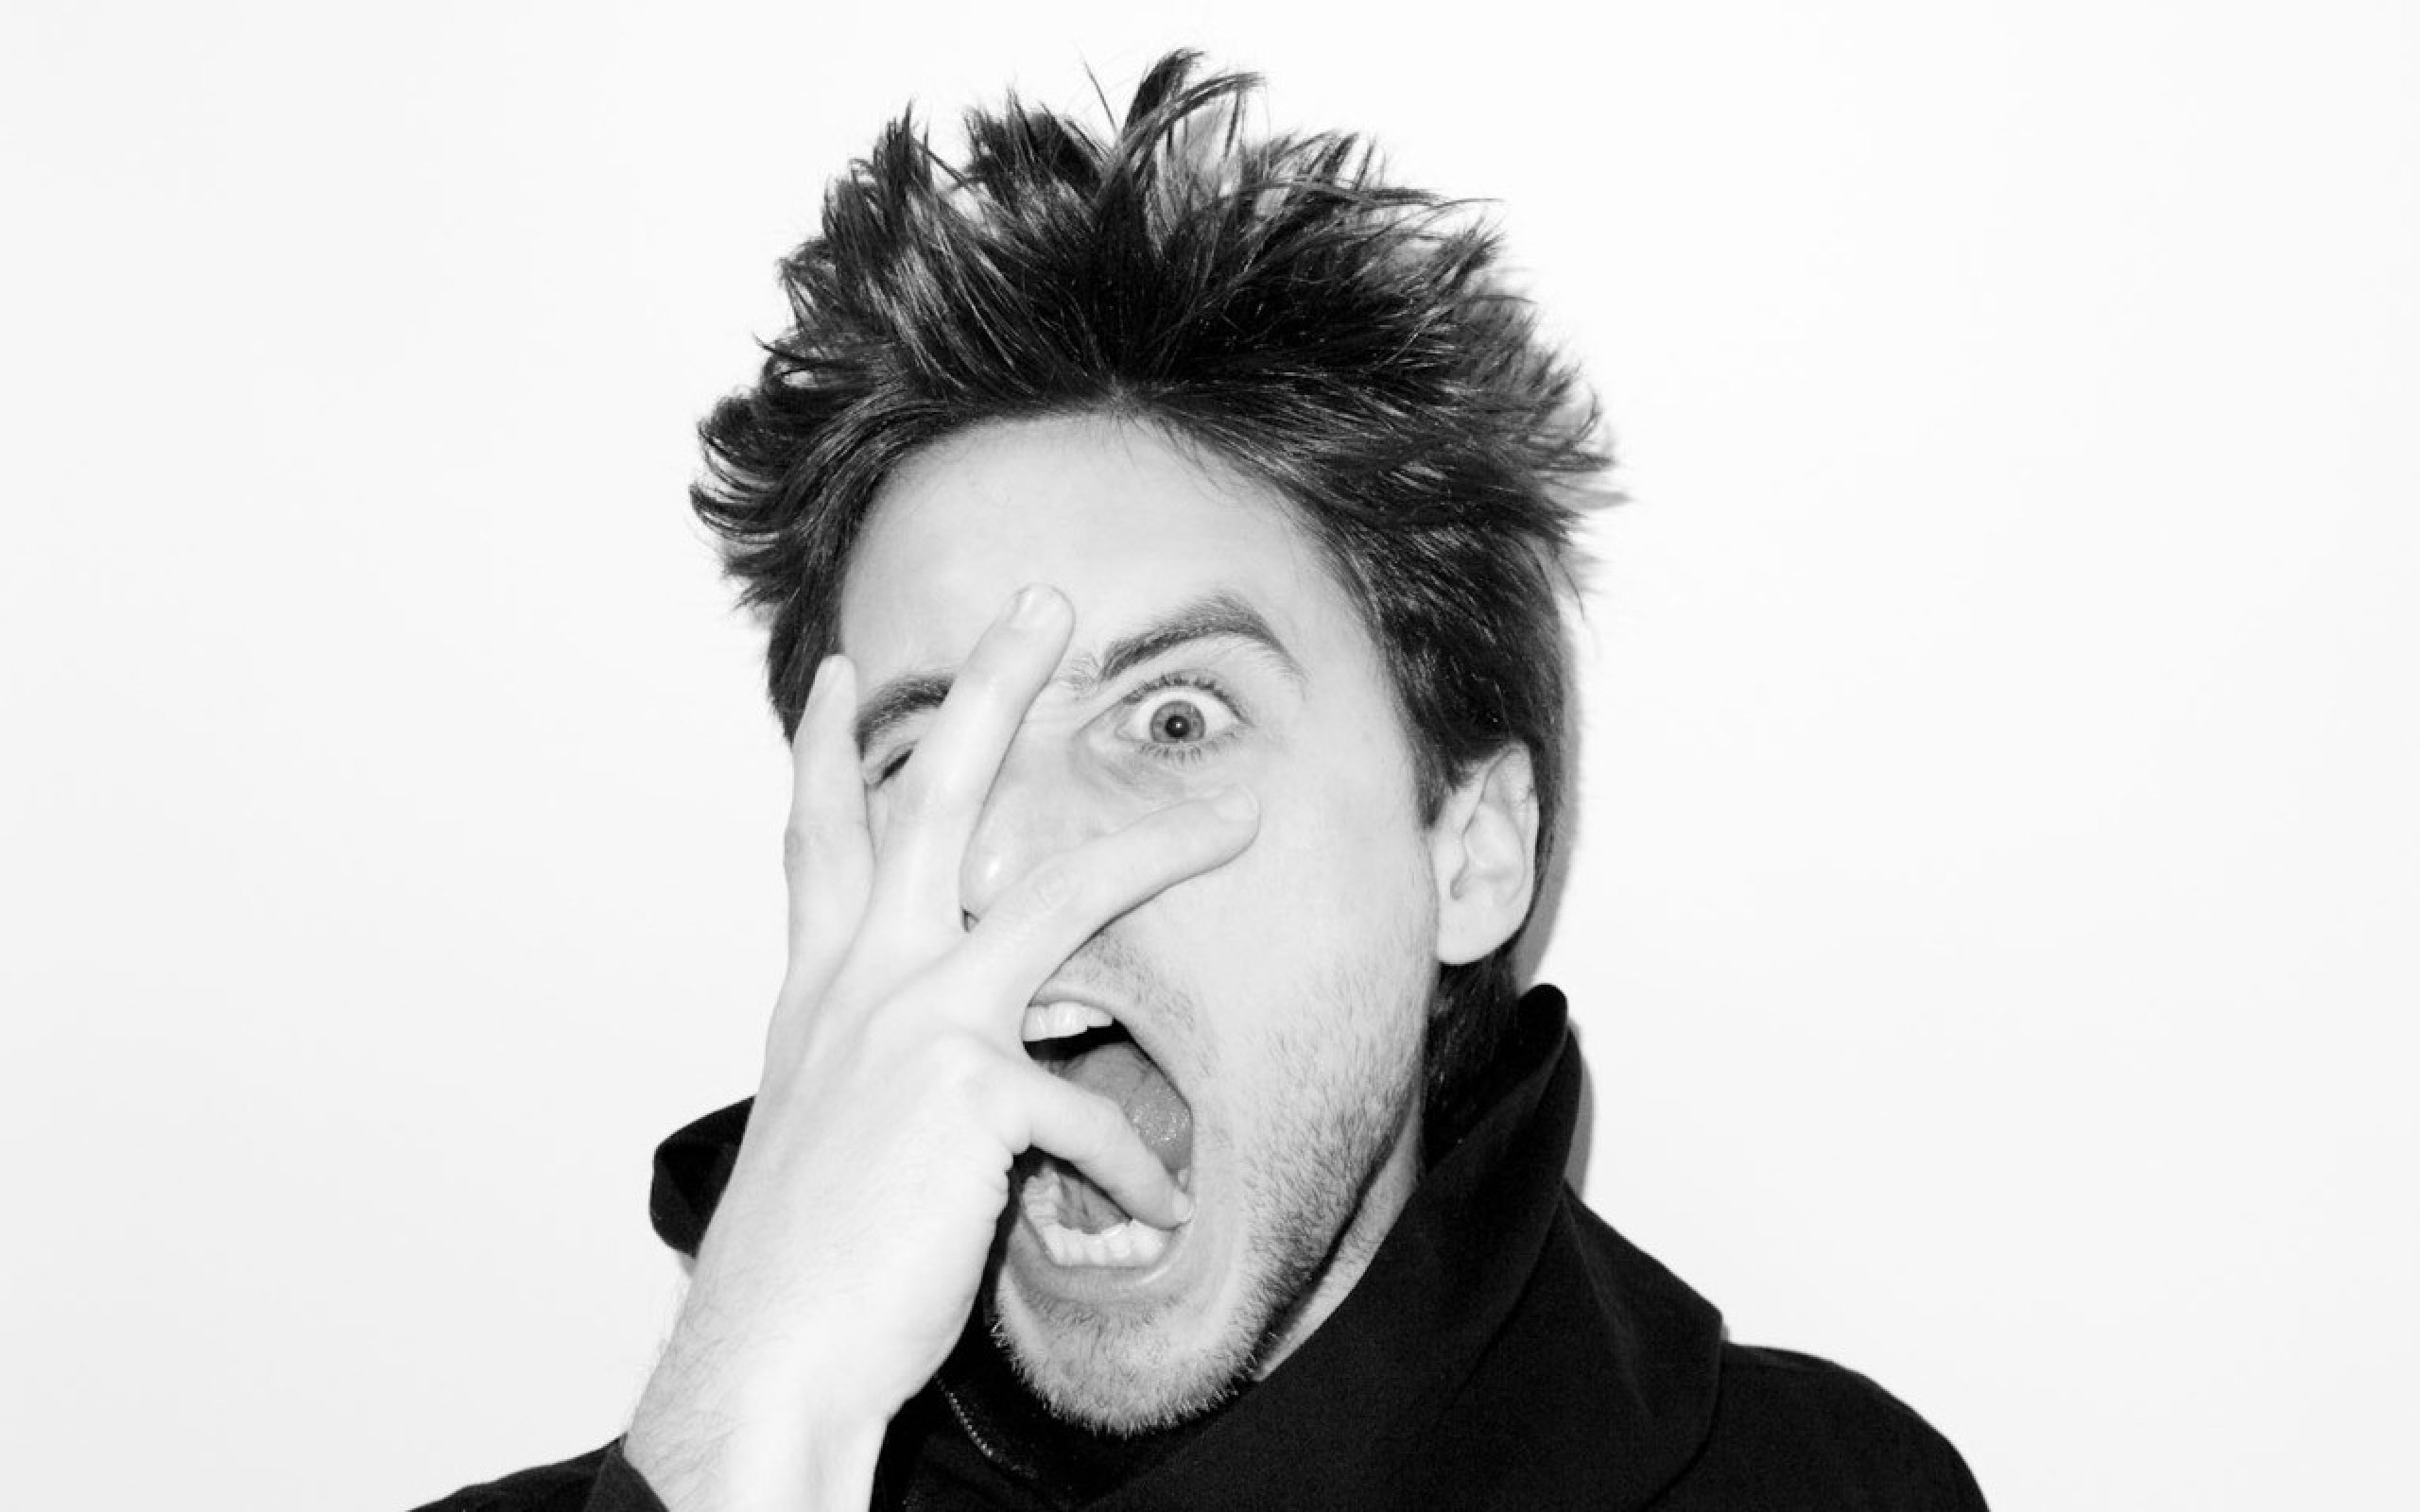 2560x1600 Jared Leto HD Wallpaper | Background Image |  | ID:502513 -  Wallpaper Abyss